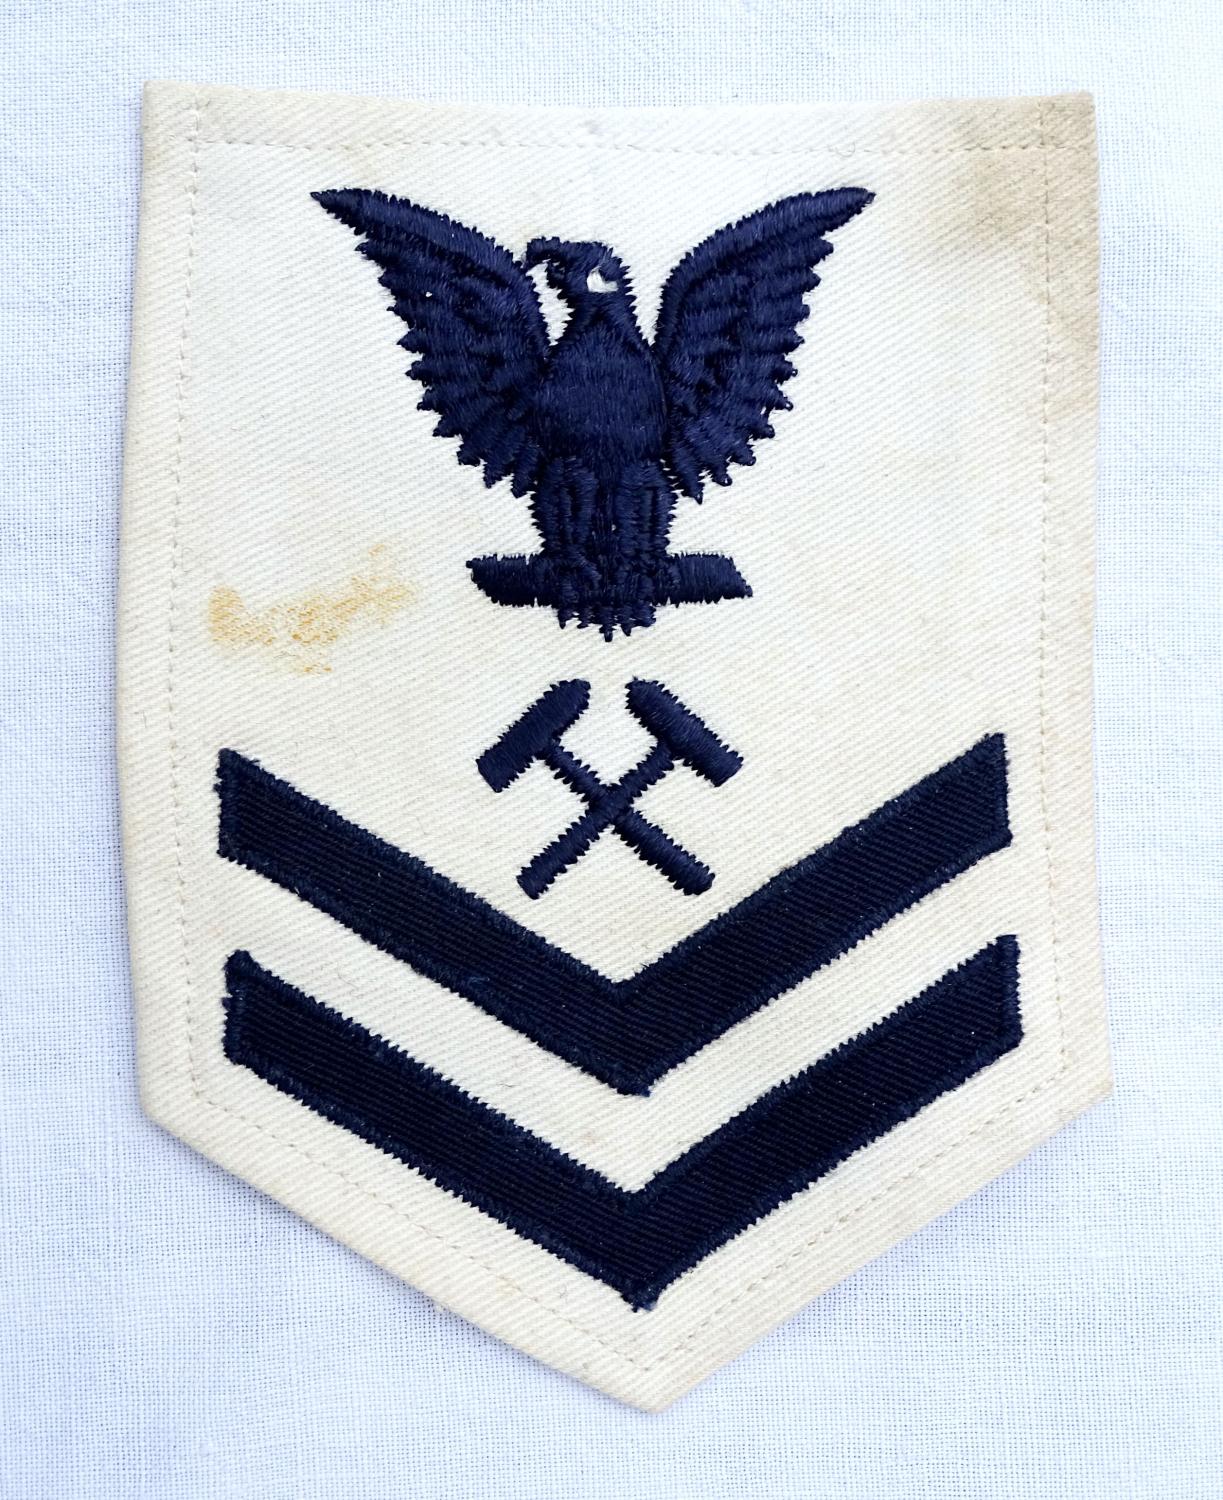 Sleeve rate USN Petty Officer 2nd class  brod&eacute; 1943